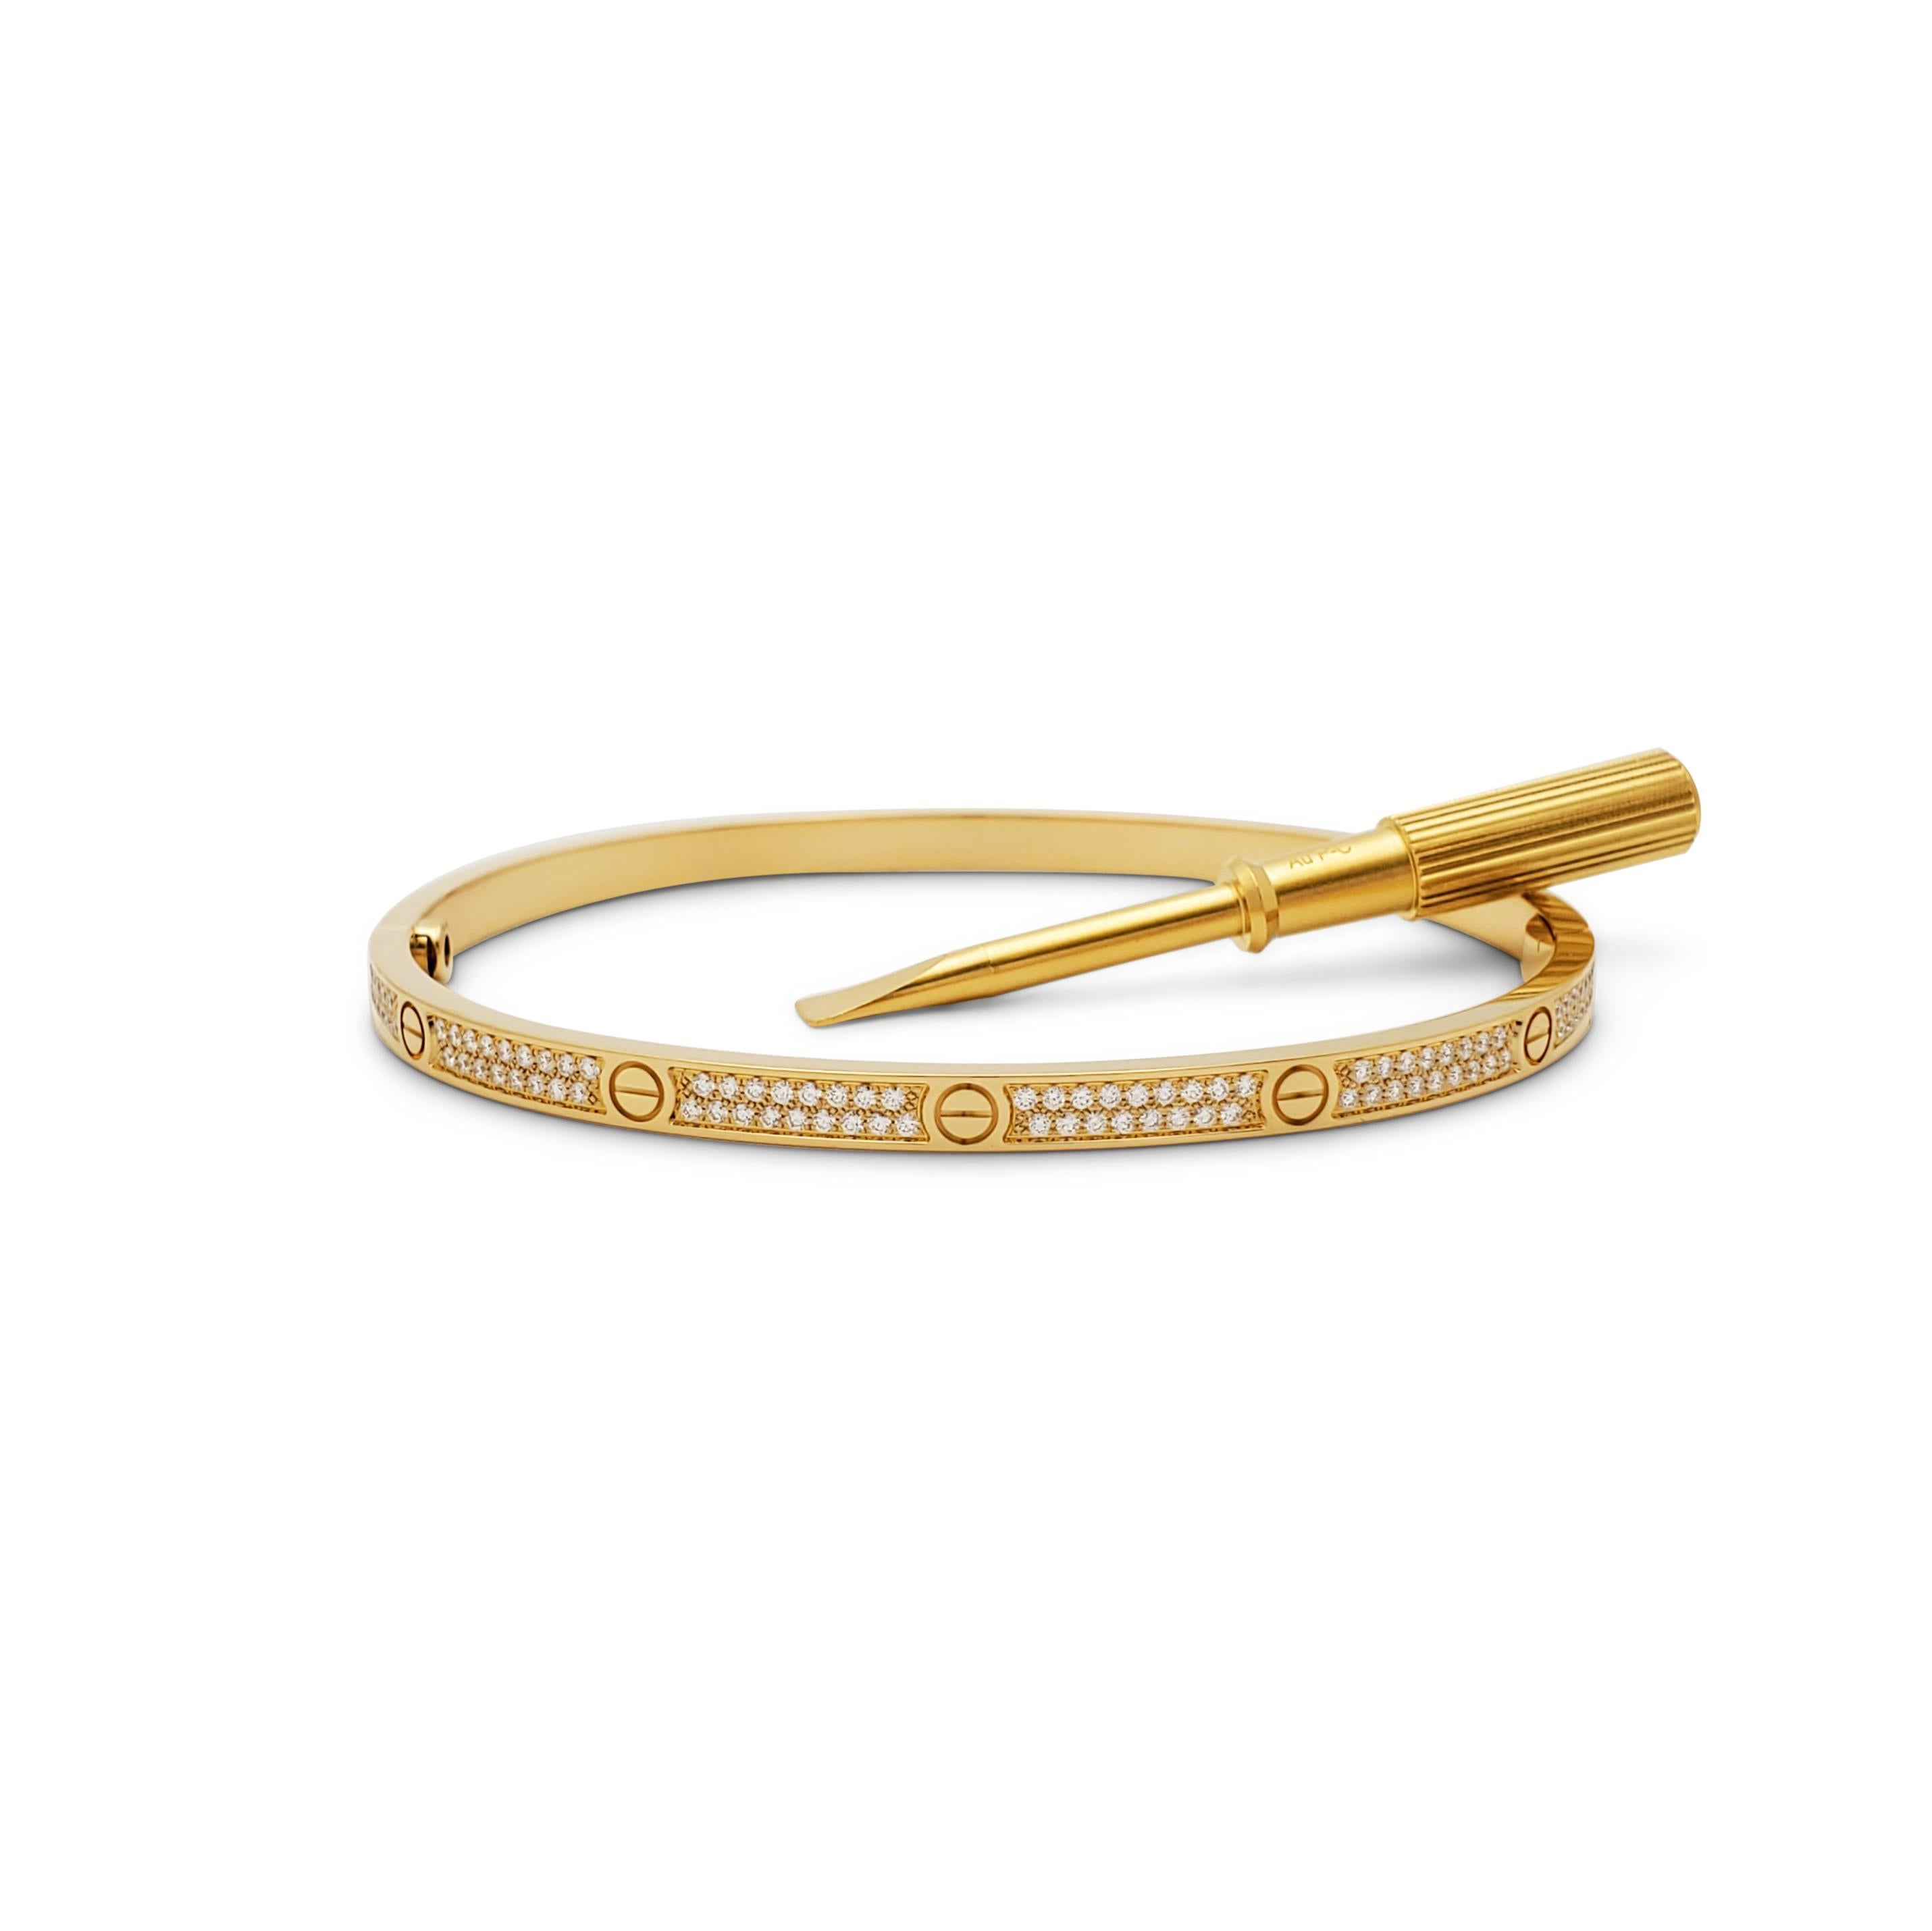 Authentic Cartier 'Love' bracelet crafted in 18 karat yellow gold is pave set with two rows of glittering round brilliant cut diamonds (E-F, VS) weighing an estimated 0.95 carats total. Size 18.  Signed Cartier, Au750, 18, with serial number and